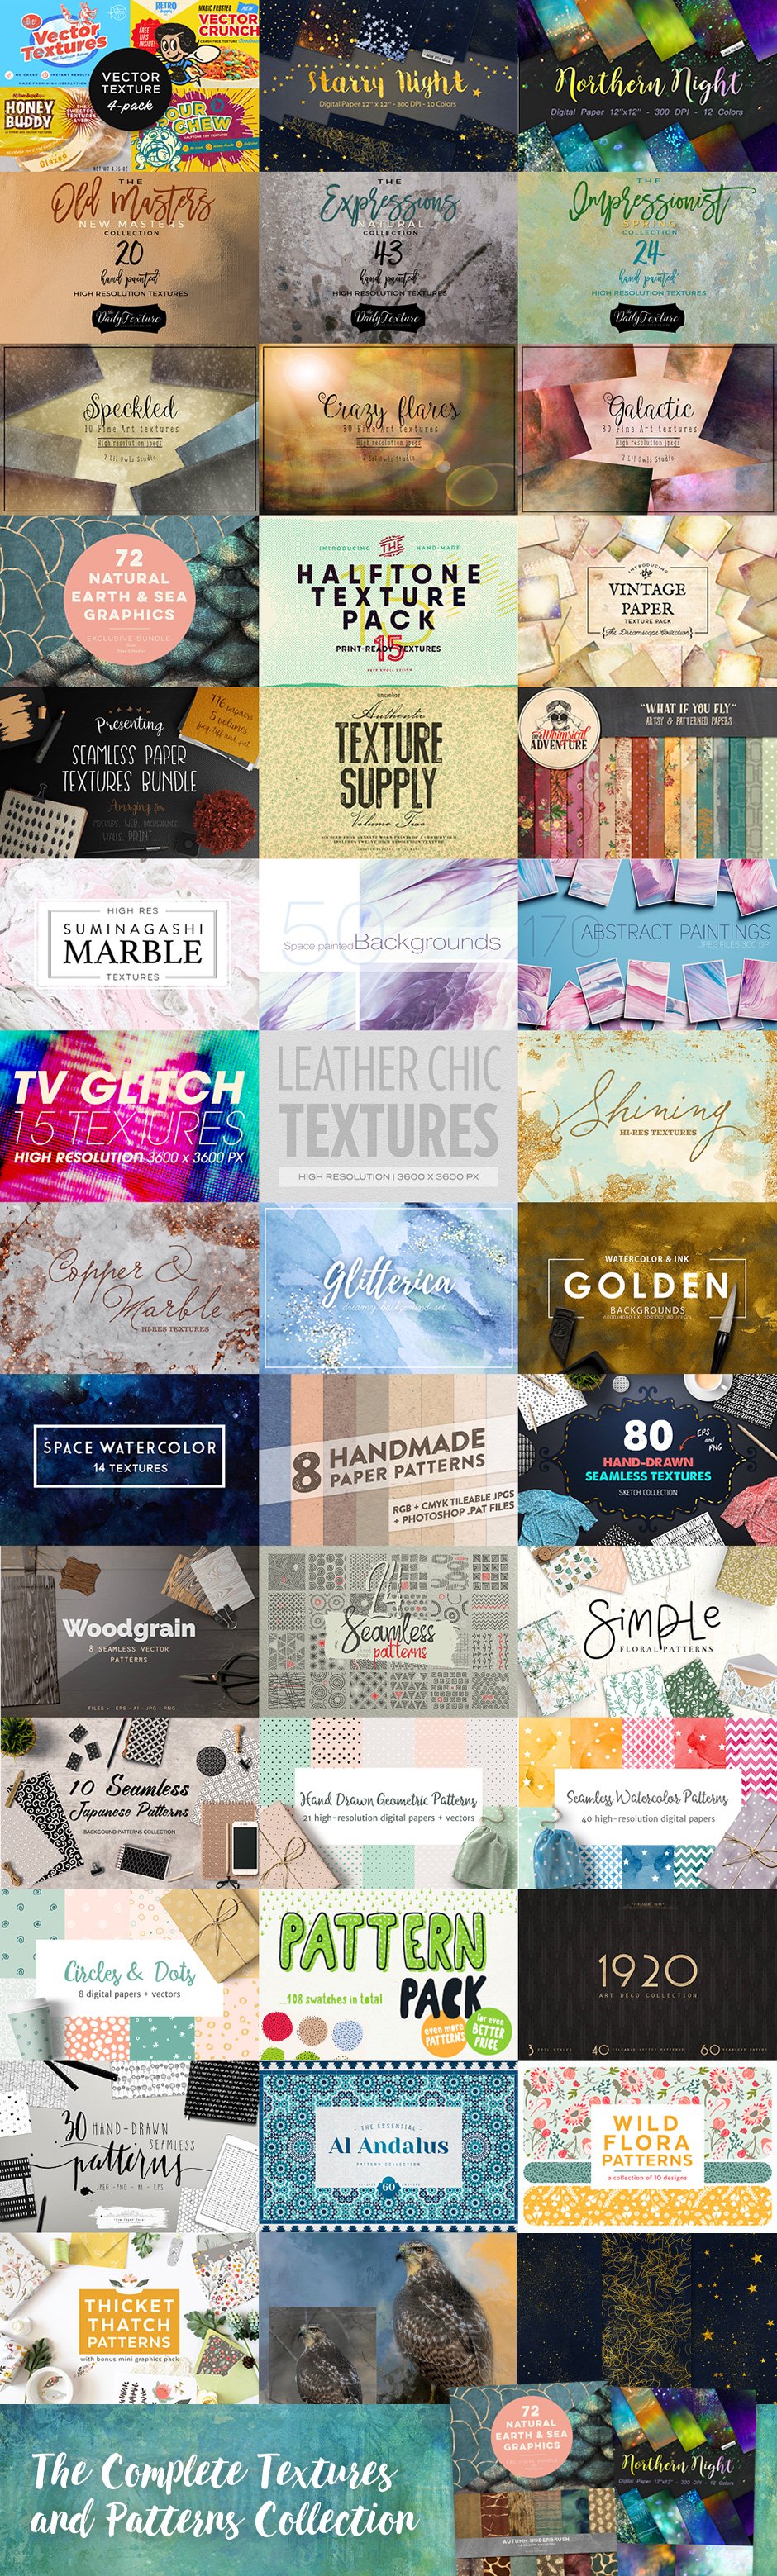 The Complete Textures and Patterns Collection